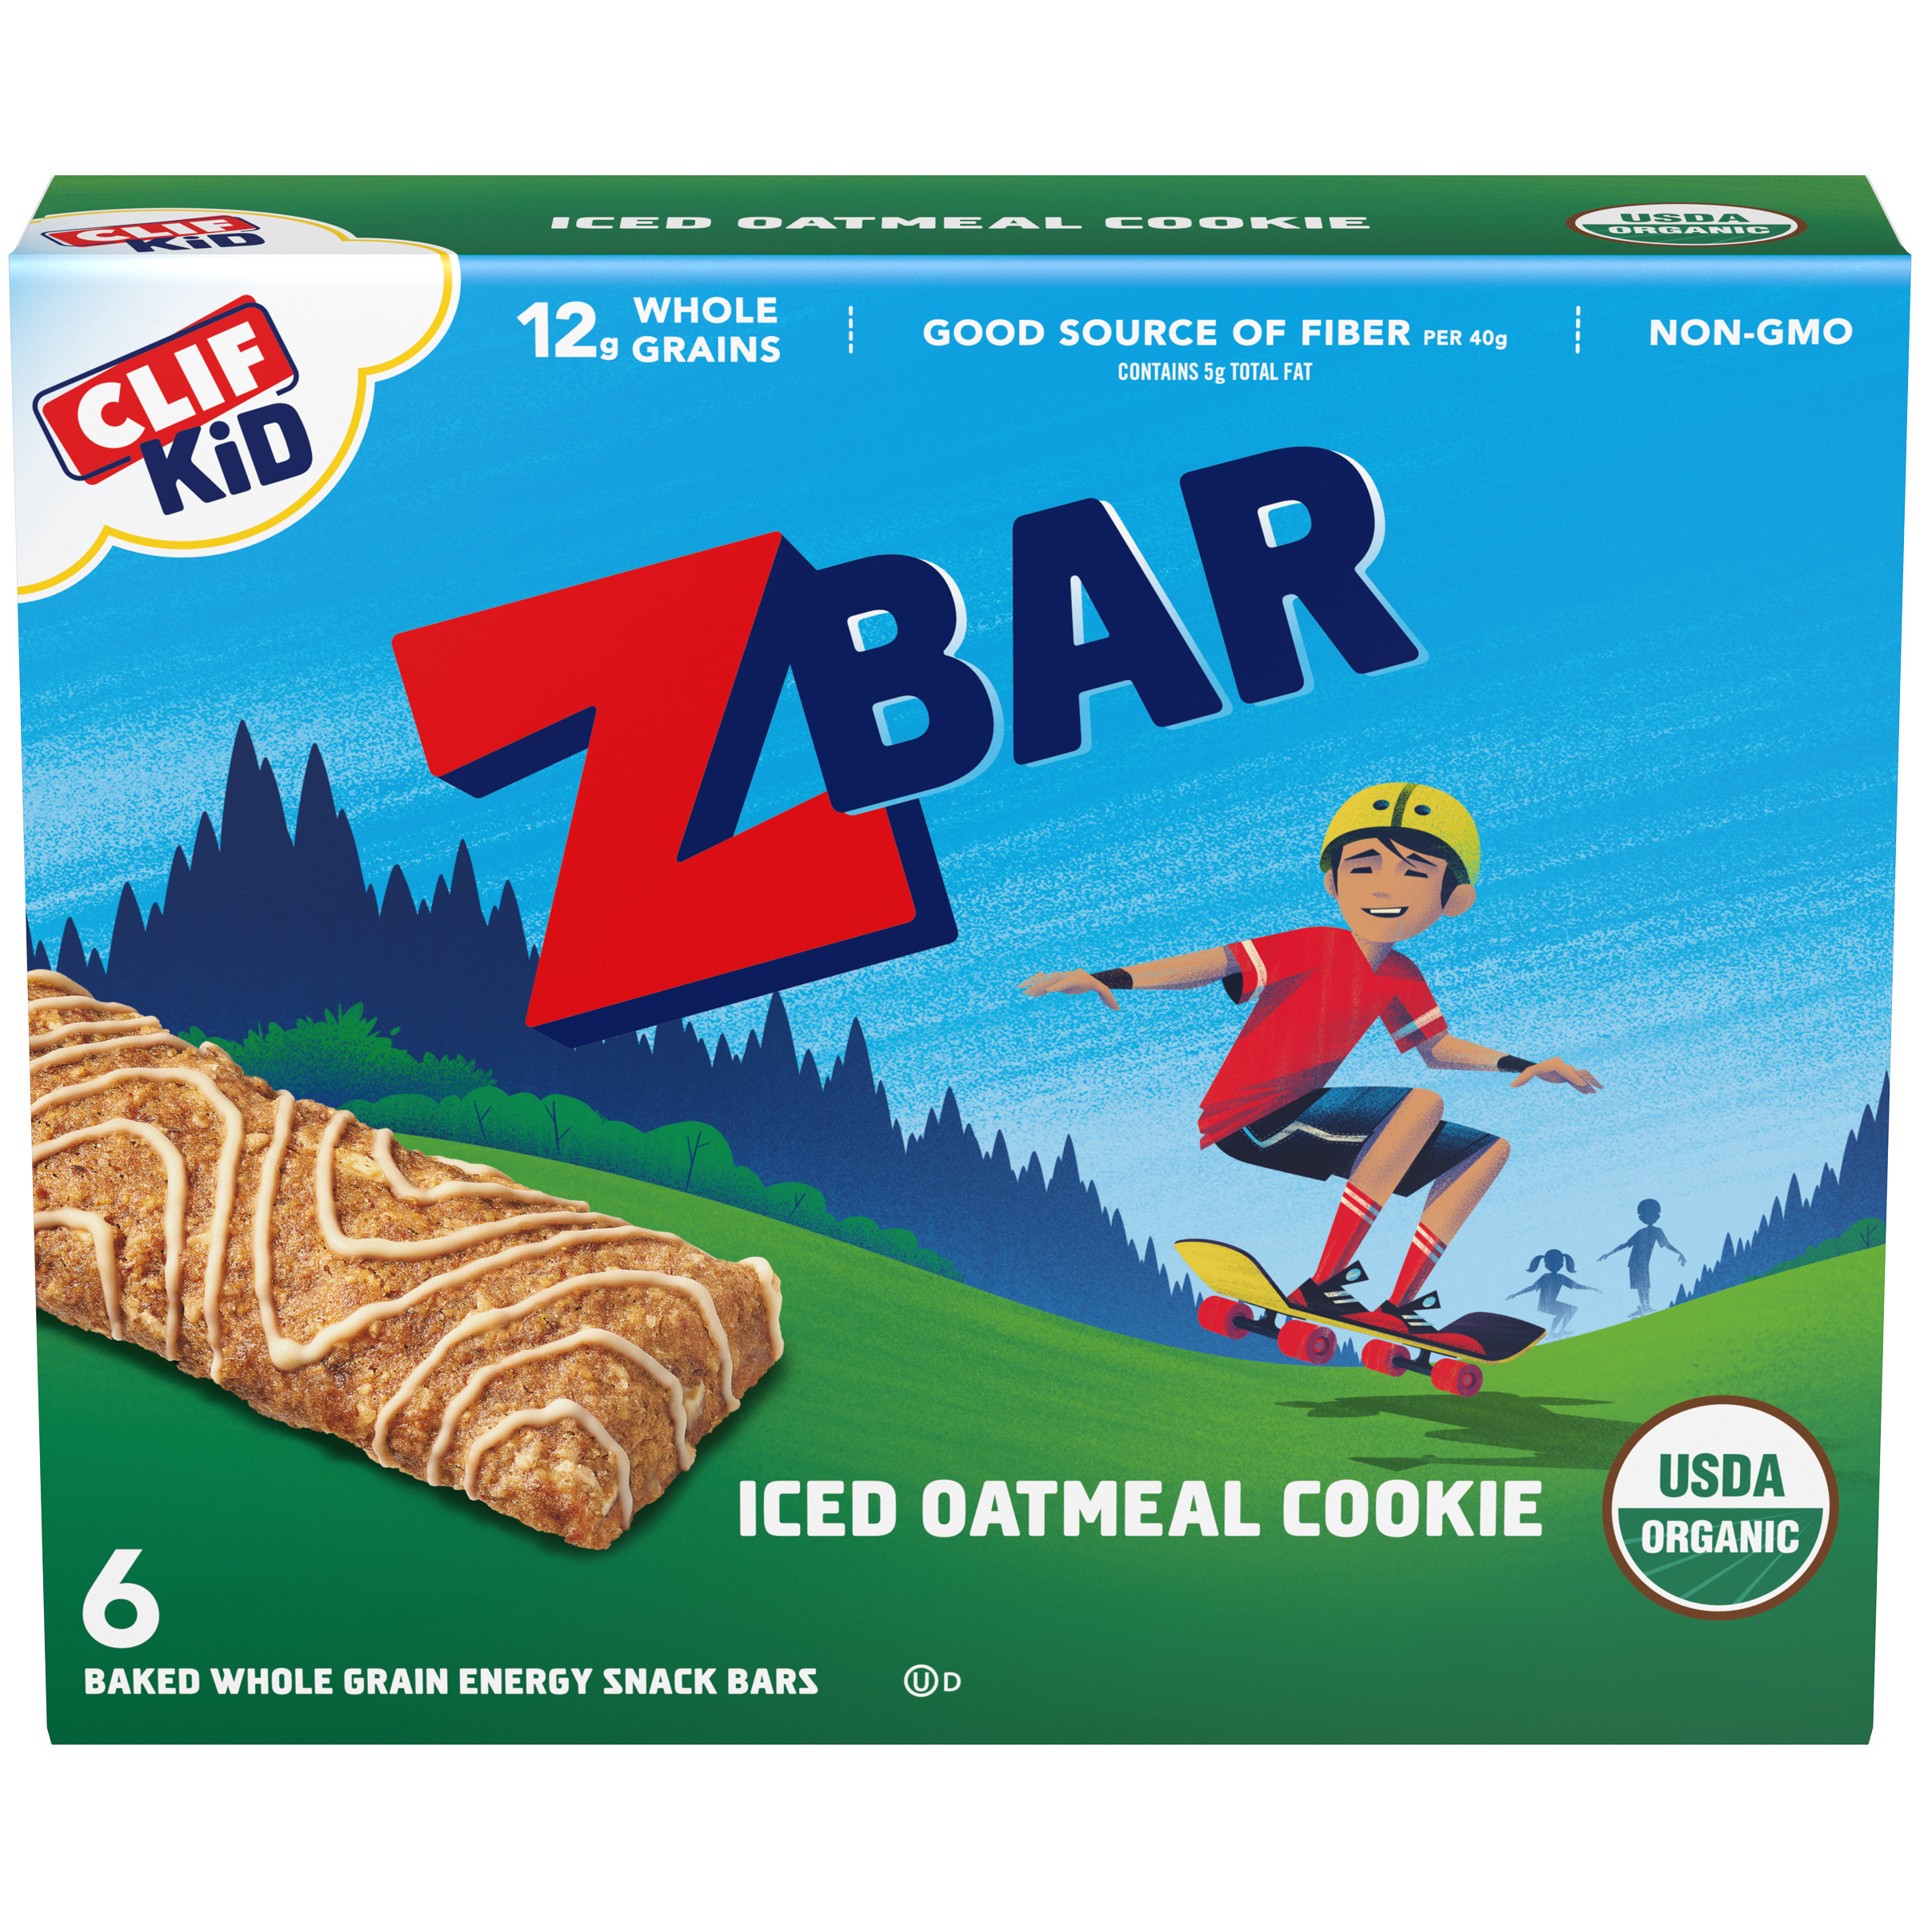 slide 1 of 9, Zbar - Iced Oatmeal Cookie - Soft Baked Whole Grain Snack Bars - USDA Organic - Non-GMO - Plant-Based - 1.27 oz. (6 Pack), 7.62 oz